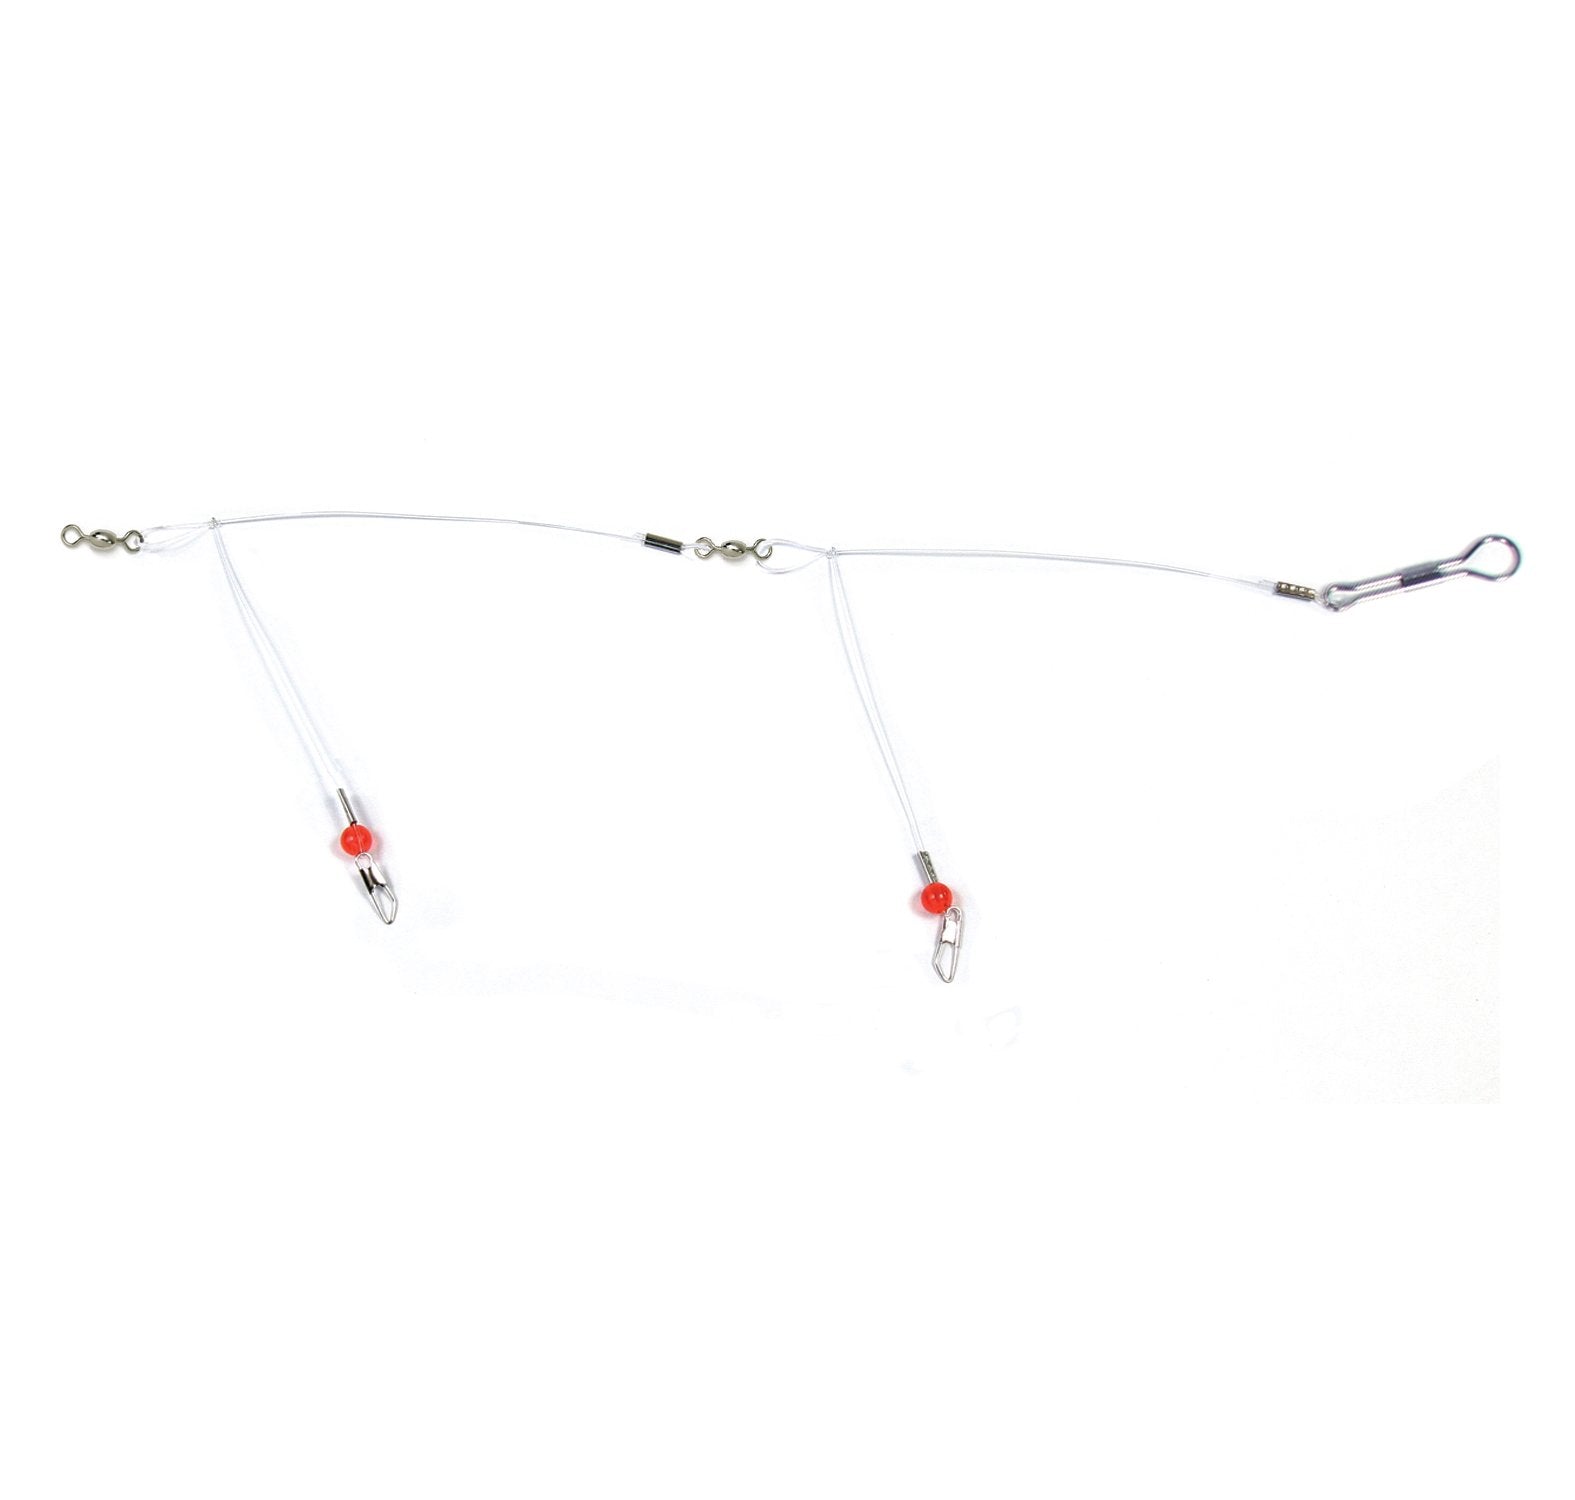 Surf Shark Pulley Rig - 10/0 Inline Circle Hook, 170lb Wire - Shark rig for  surf fishing